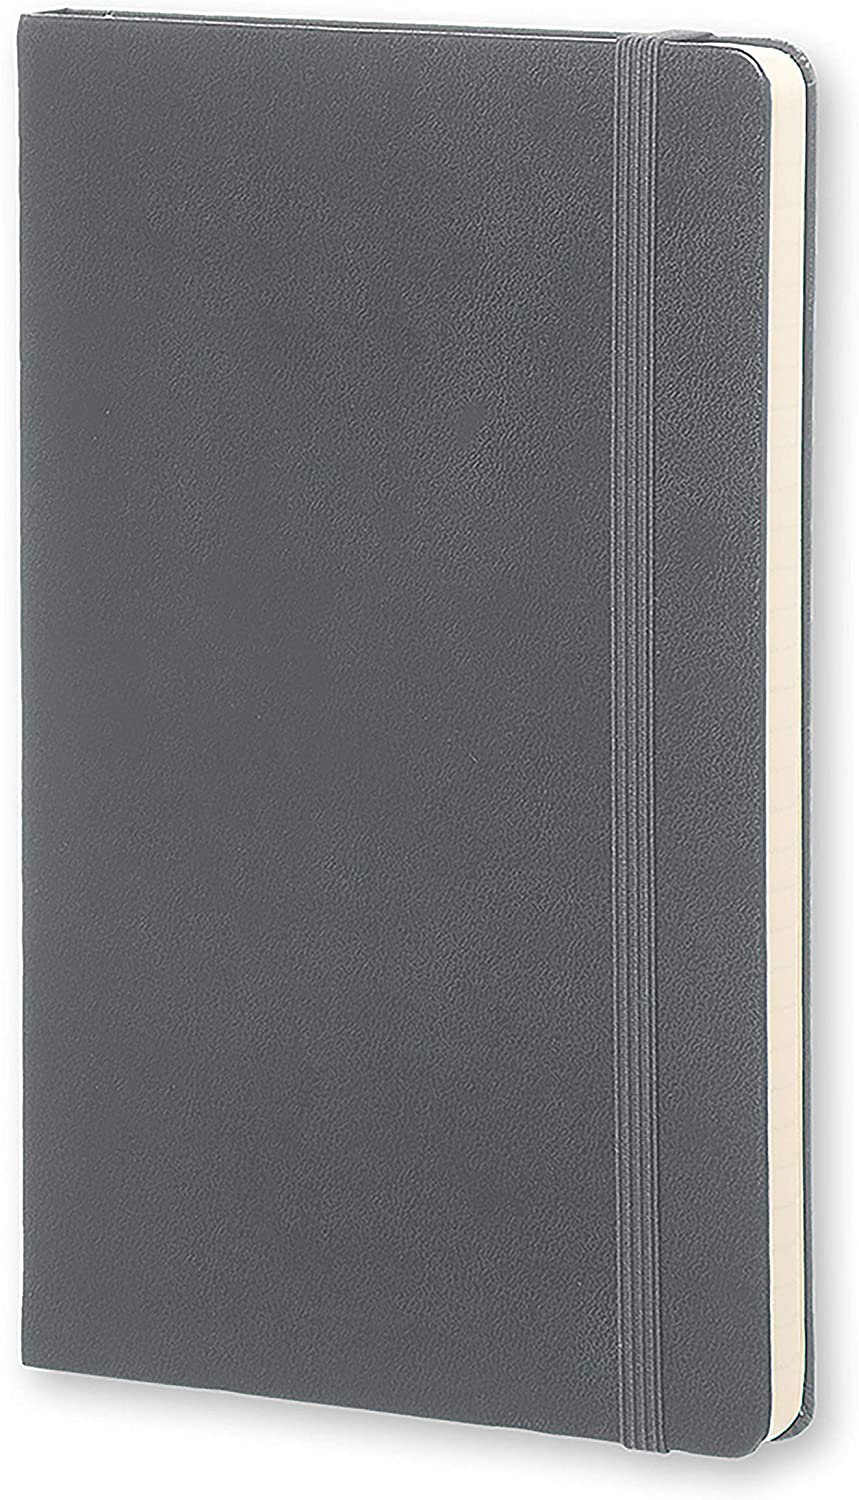 Moleskine Classic Notebook Grey for online shopping in Pakistan at Chapters 2